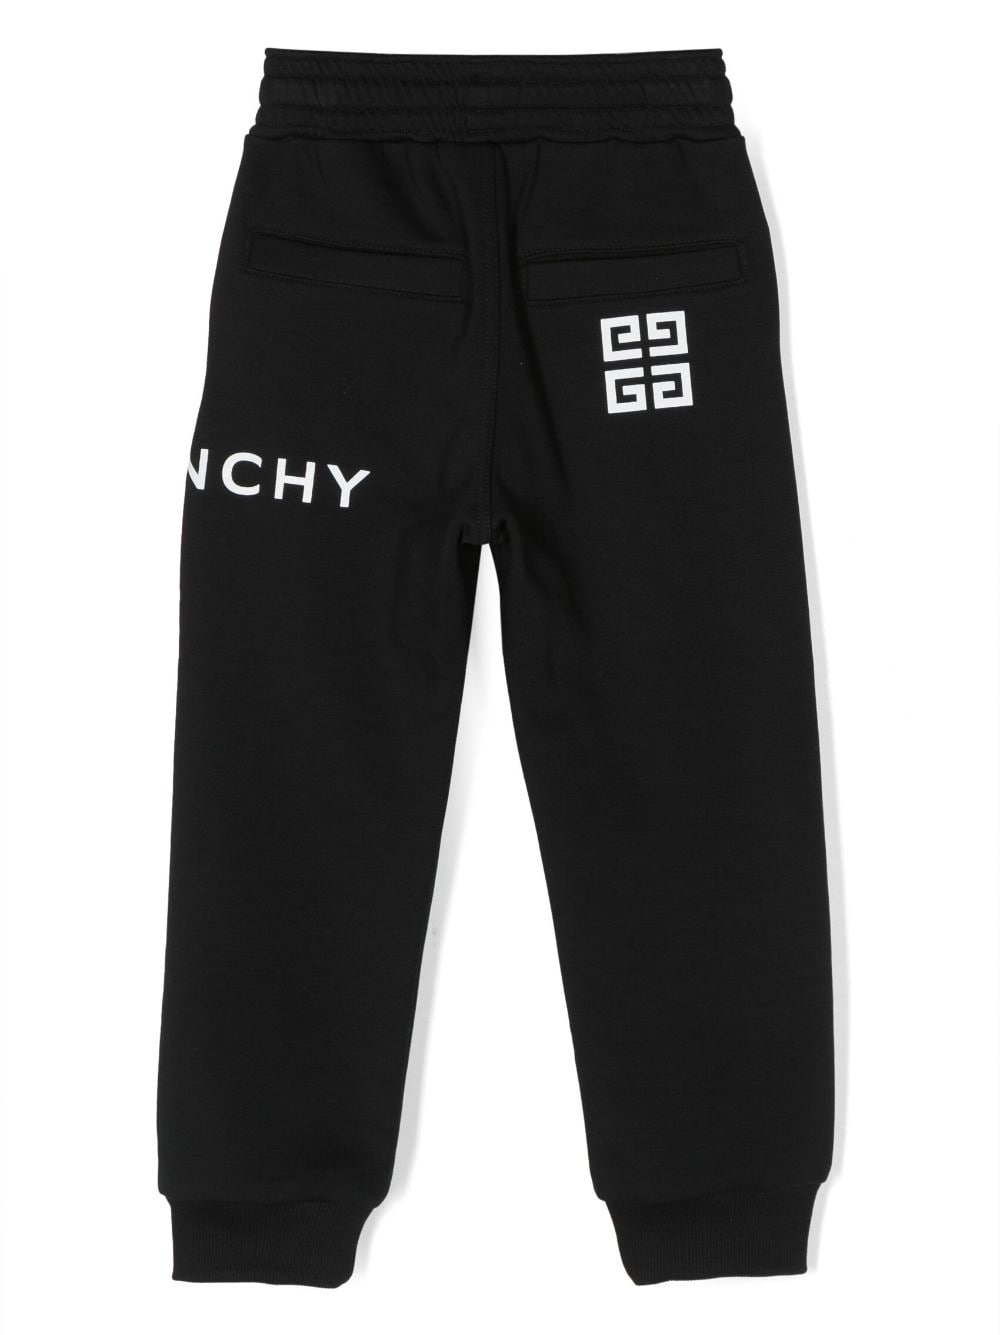 Black sports trousers for boys with logo